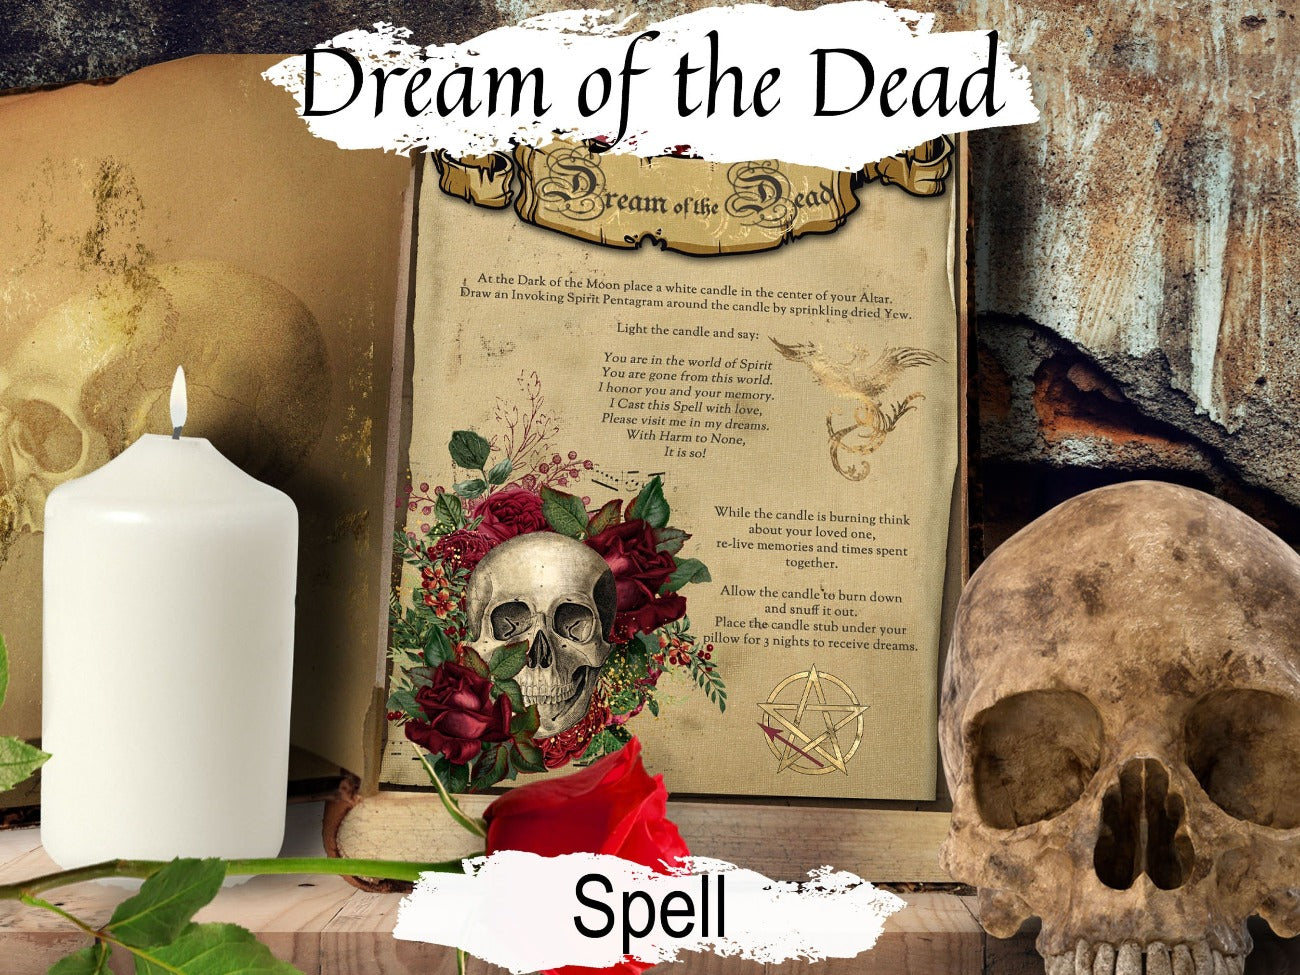 SPIRIT DREAM SPELL, Wicca Witchcraft Dream of Lost Loved Ones, Spirit Dreams, Lucid Dreaming Spell, Dream Messages, Talk to Spirits Ghosts - Morgana Magick Spell